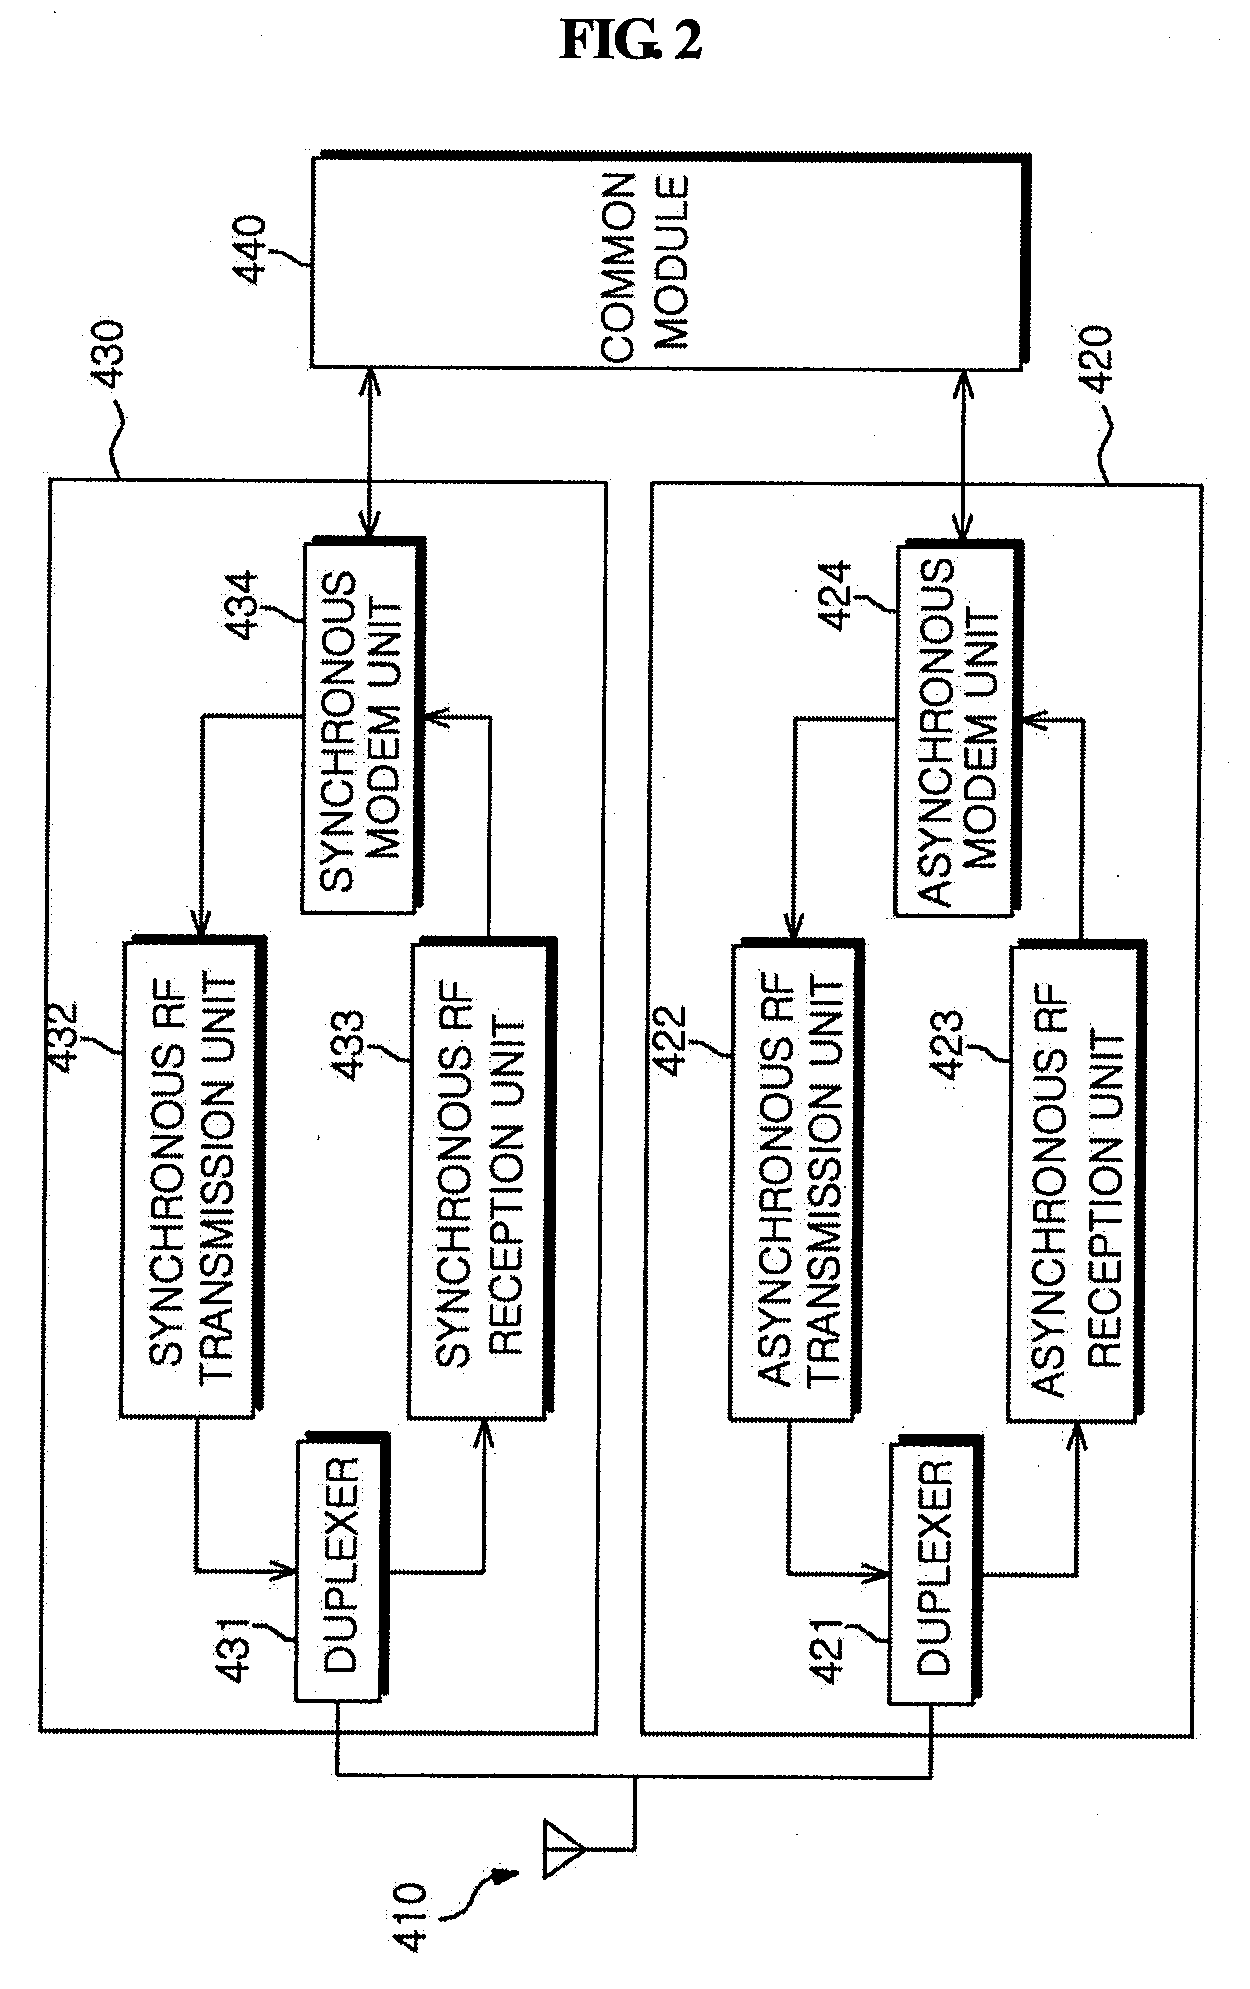 Hand Over Method From Asynchronous Mobile Communication Network to Synchronous Mobile Communication Network